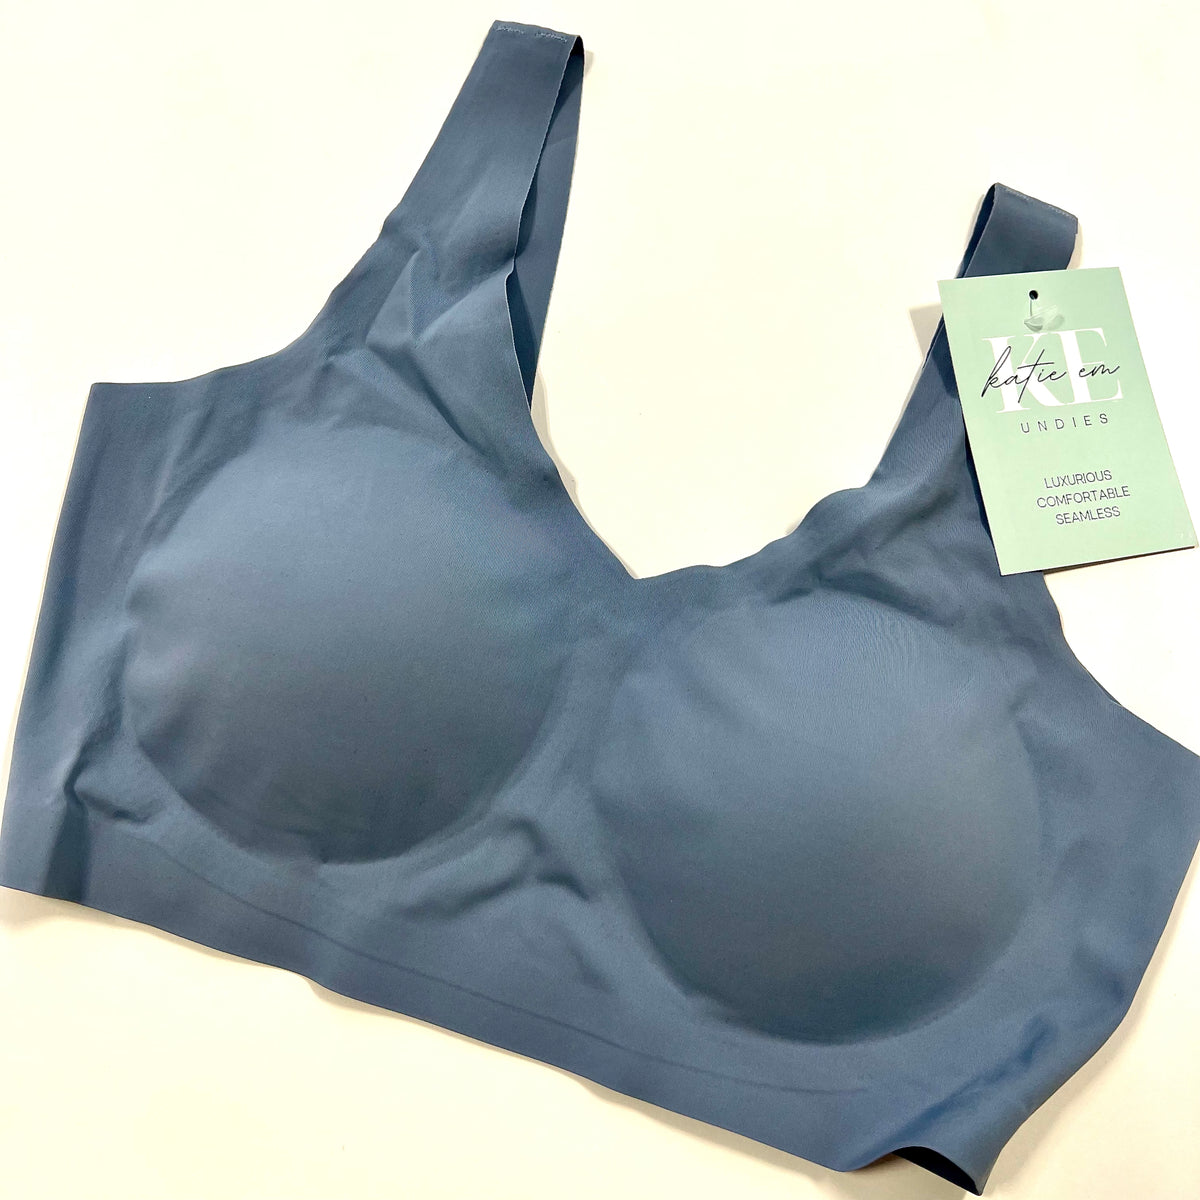 This Comfortable and Wireless Bra 'Fits Like a Dream' Is Up to 69